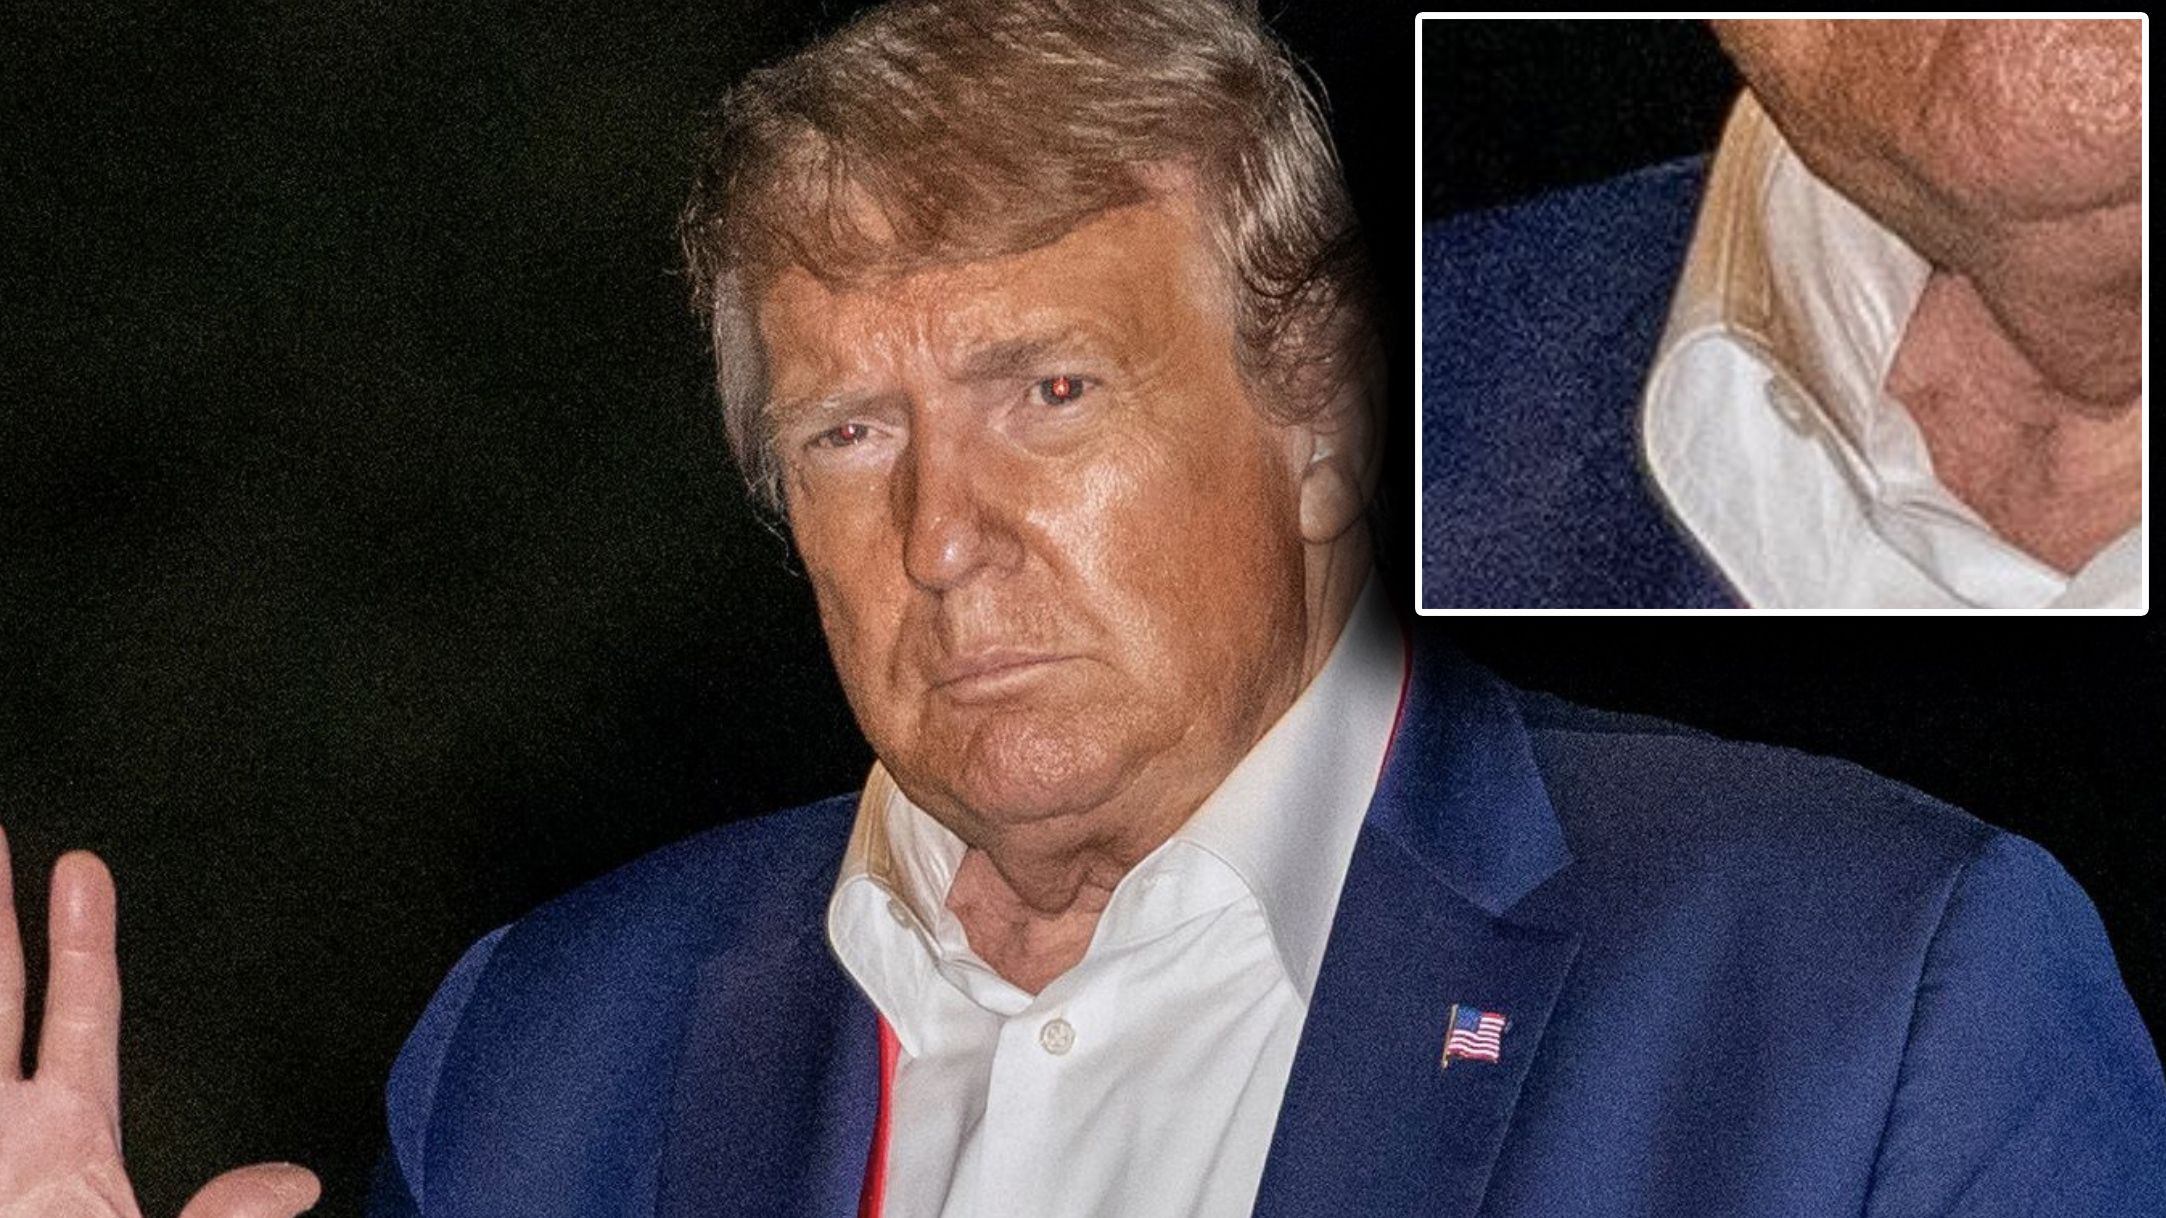 Humiliated Trump Spotted With Orange Makeup Smeared All Over His Shirt